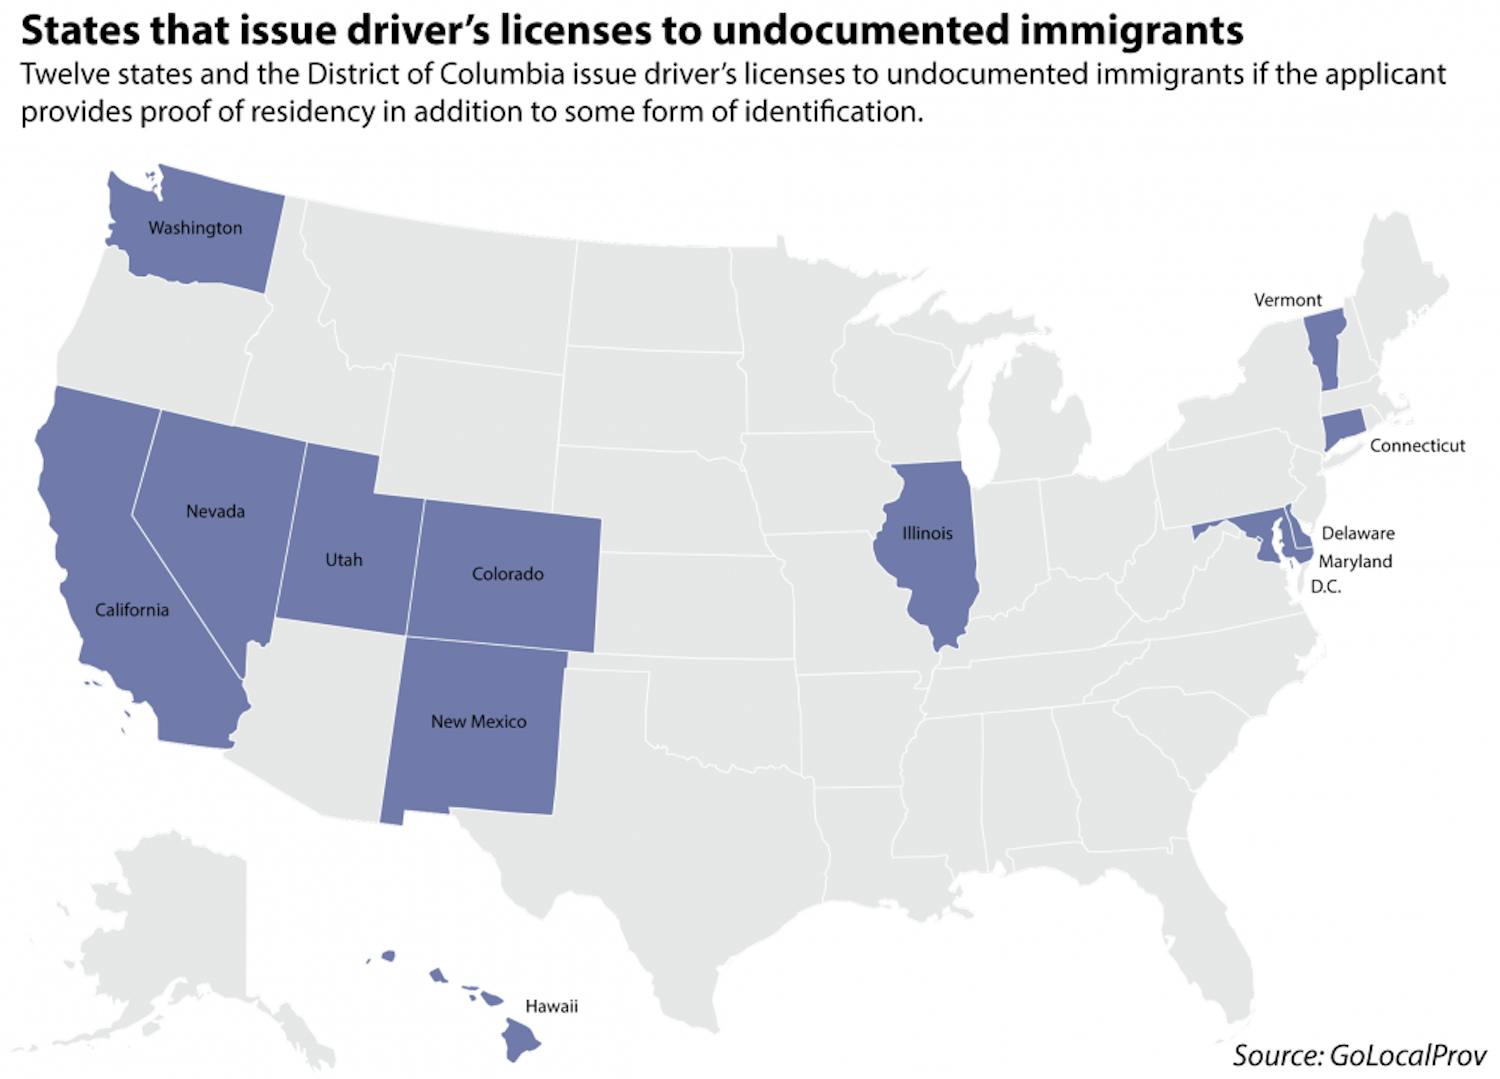 Young_LicensesForIllegalImmigrants_EmmaJerzyk